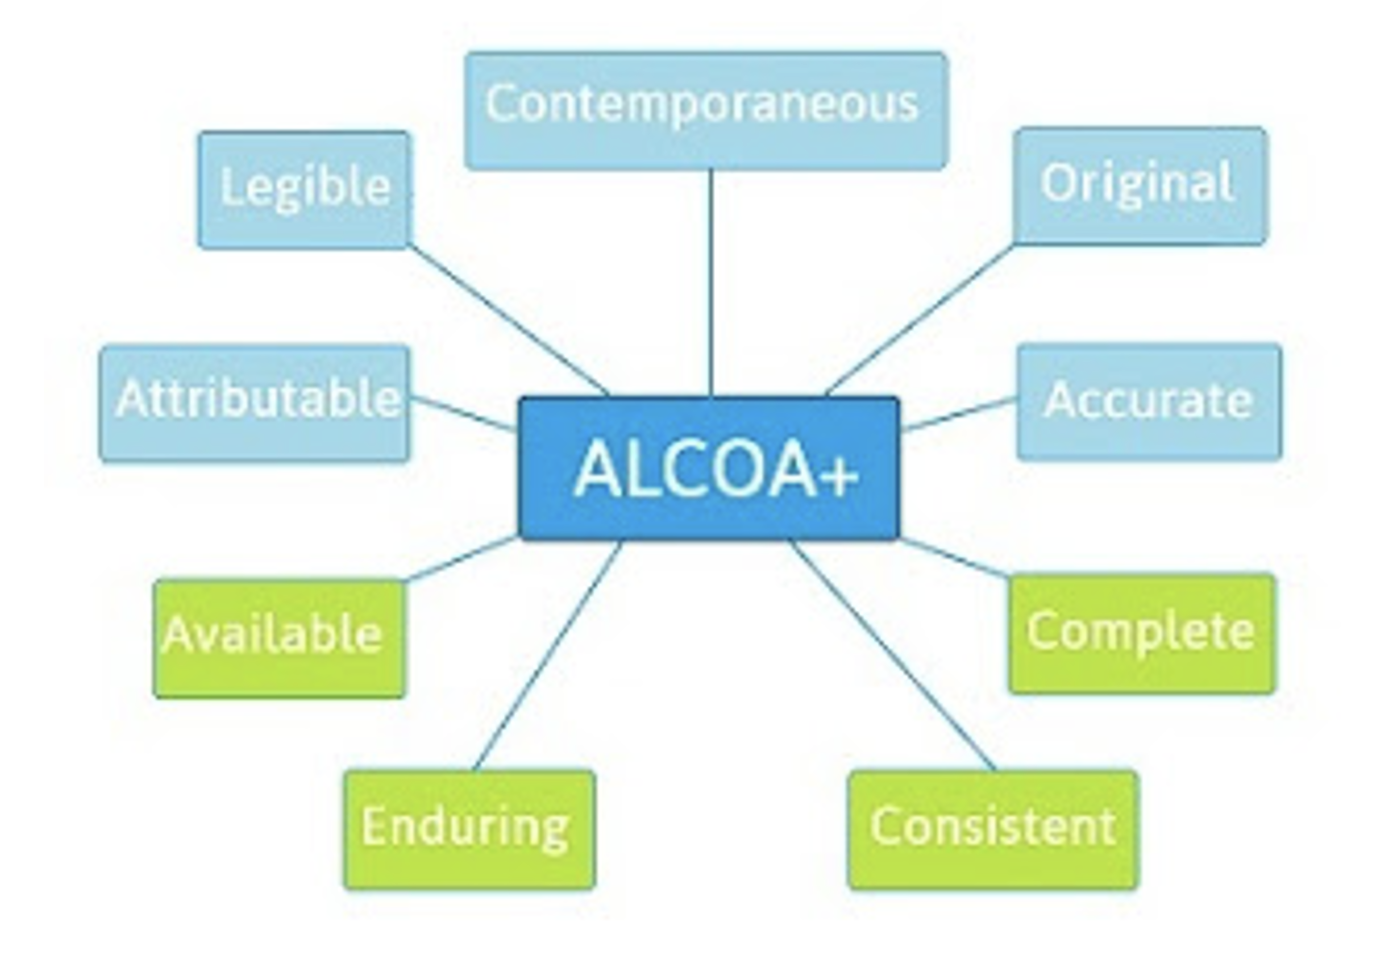 Diagram with 'ALOCA+' in the middle rectangle with the following rectangles extending from it: contemporaneous, original, accurate, complete, consistent, enduring, available, attributable, legible.